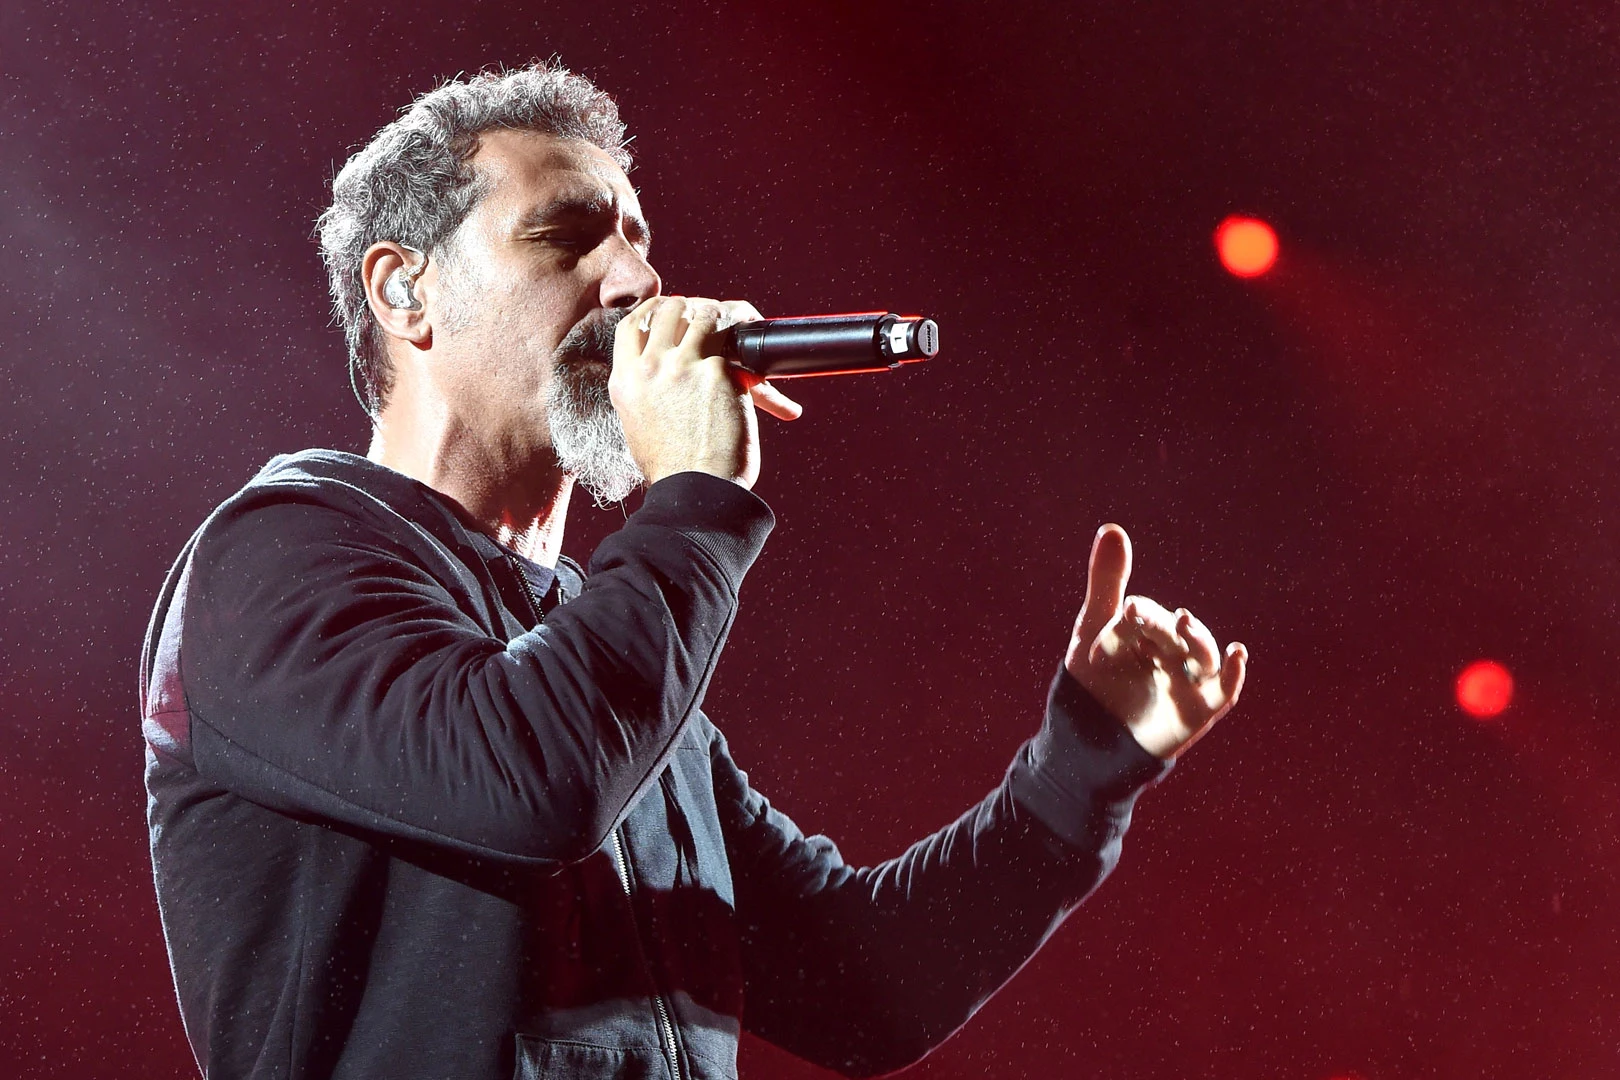 Serj Tankian: Some Fans Are Missing the Point of Our Music